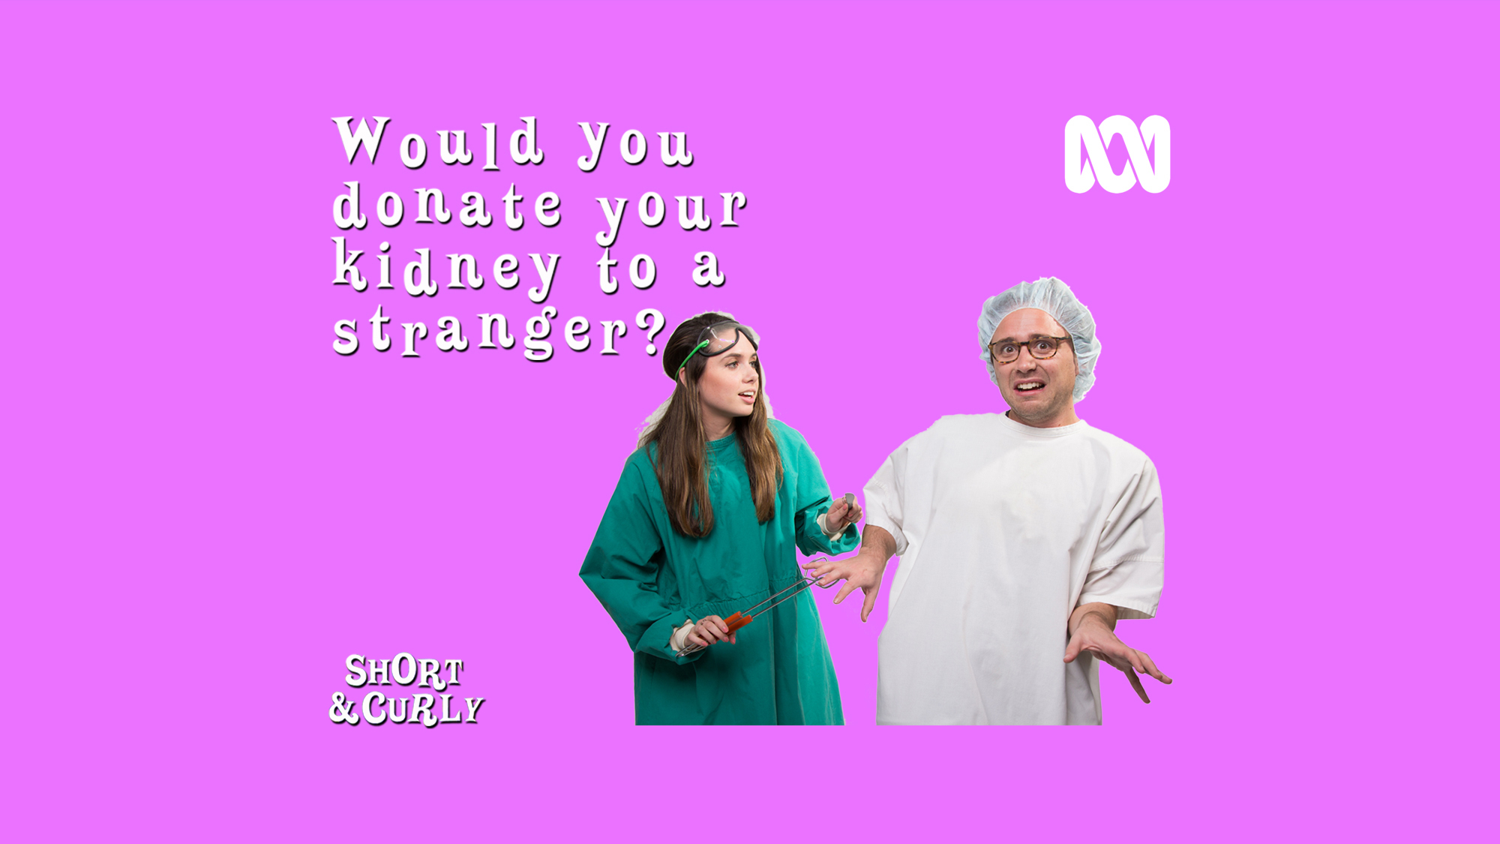 Would you donate your kidney to a stranger? RC